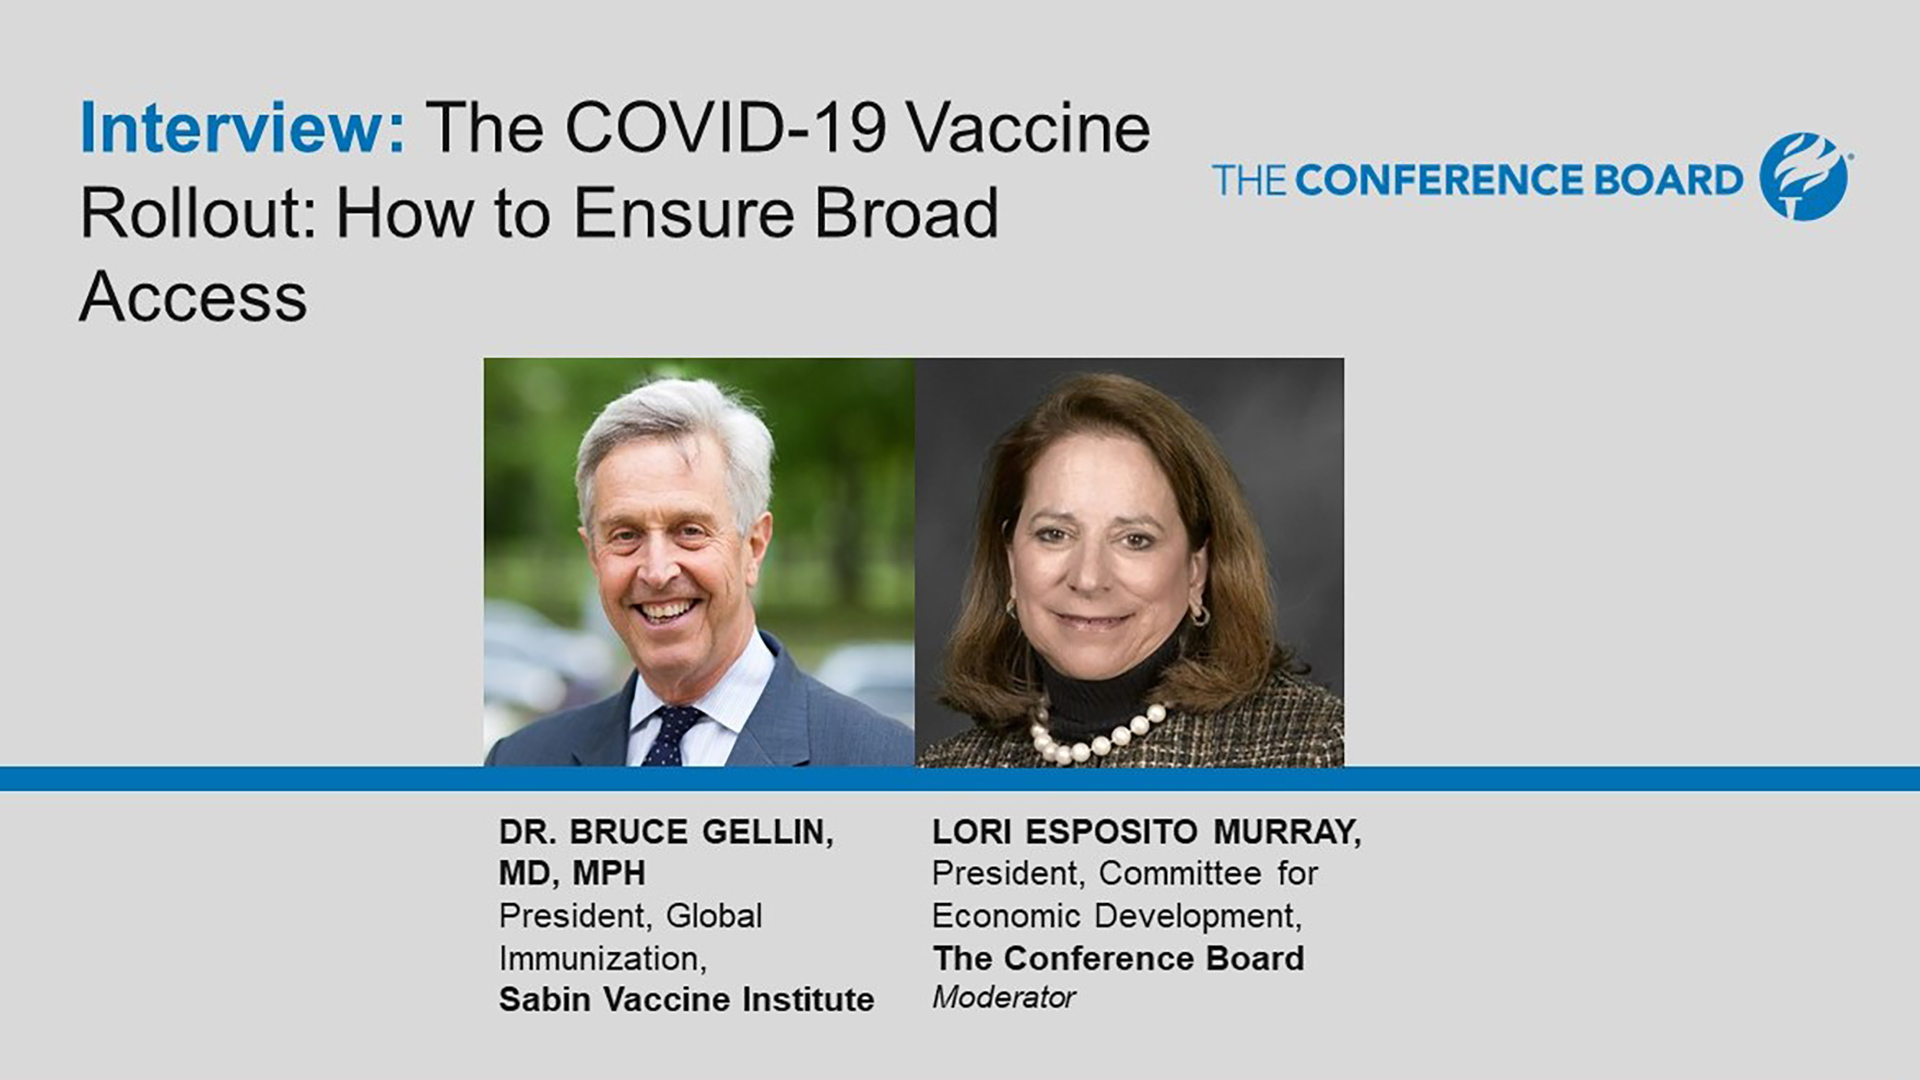 Building a More Civil & Just Society: Session I - The COVID 19 Vaccine Rollout How to Ensure Broad Access. 19 Mins